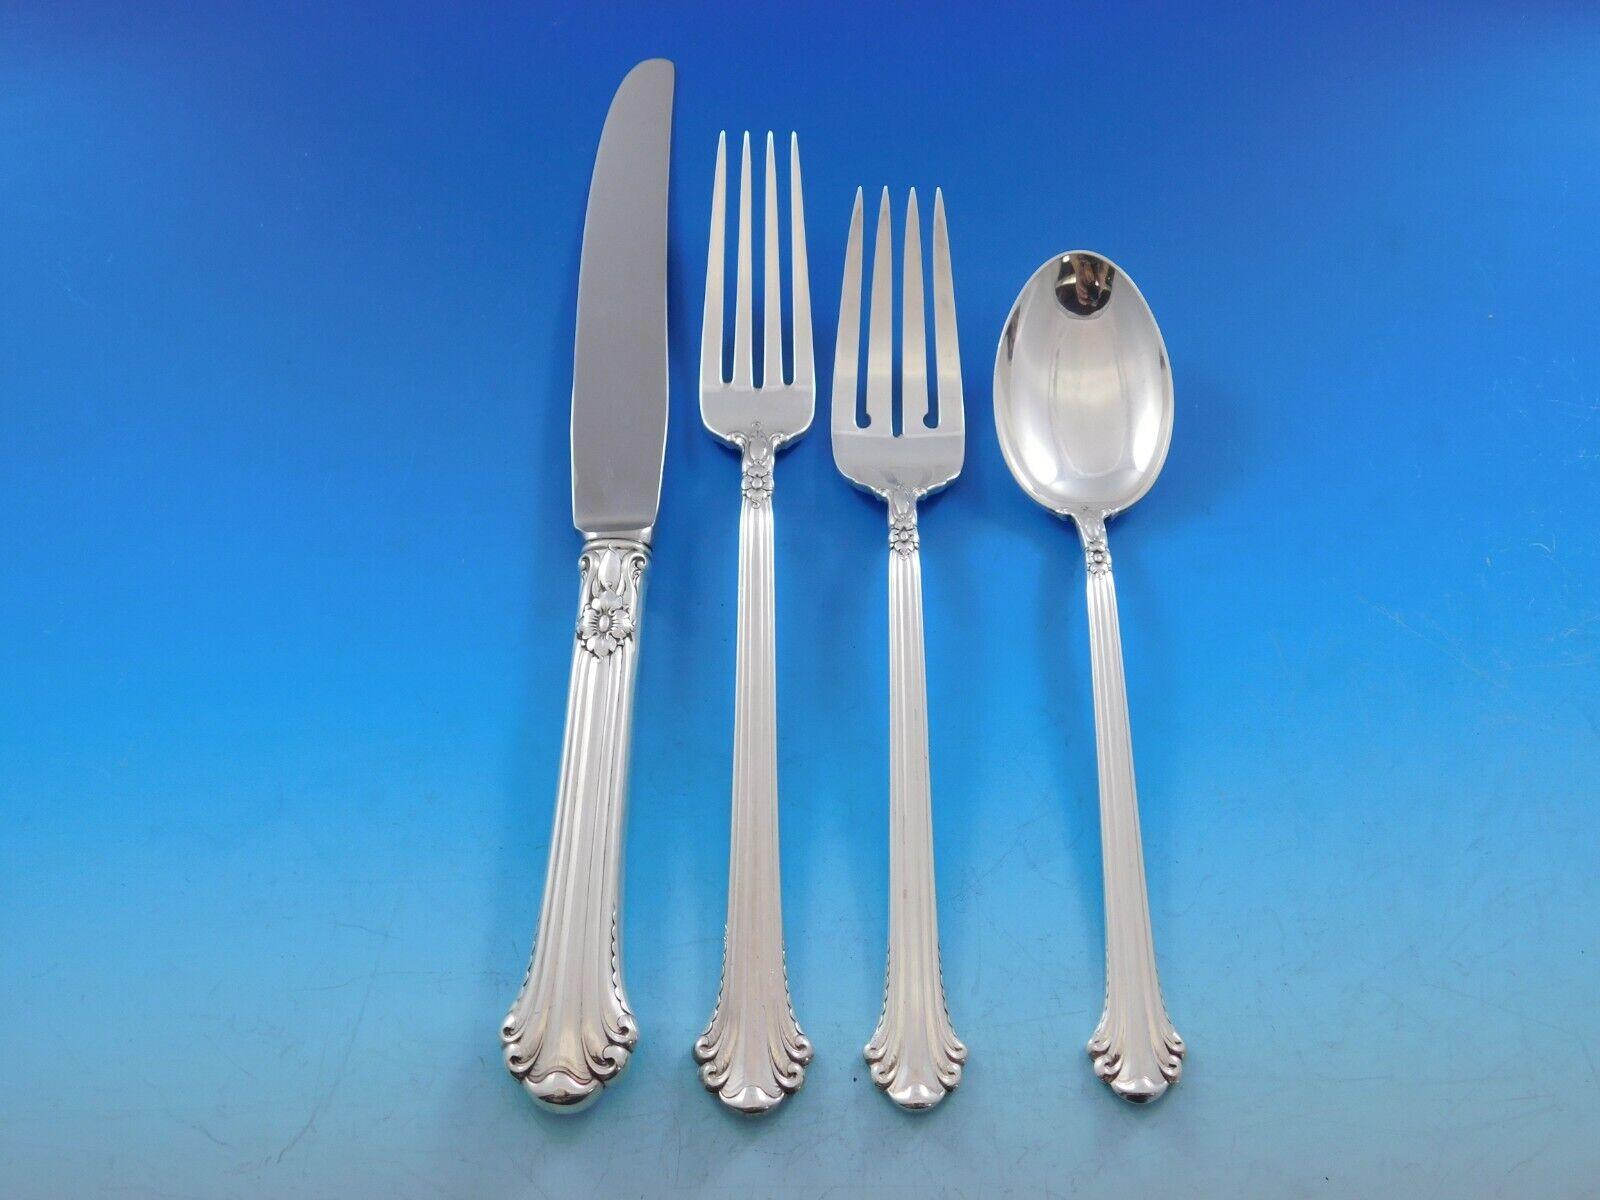 Lovely Silver Plumes by Towle sterling silver Flatware set, 97 pieces. This set includes:

8 Knives, 8 3/4